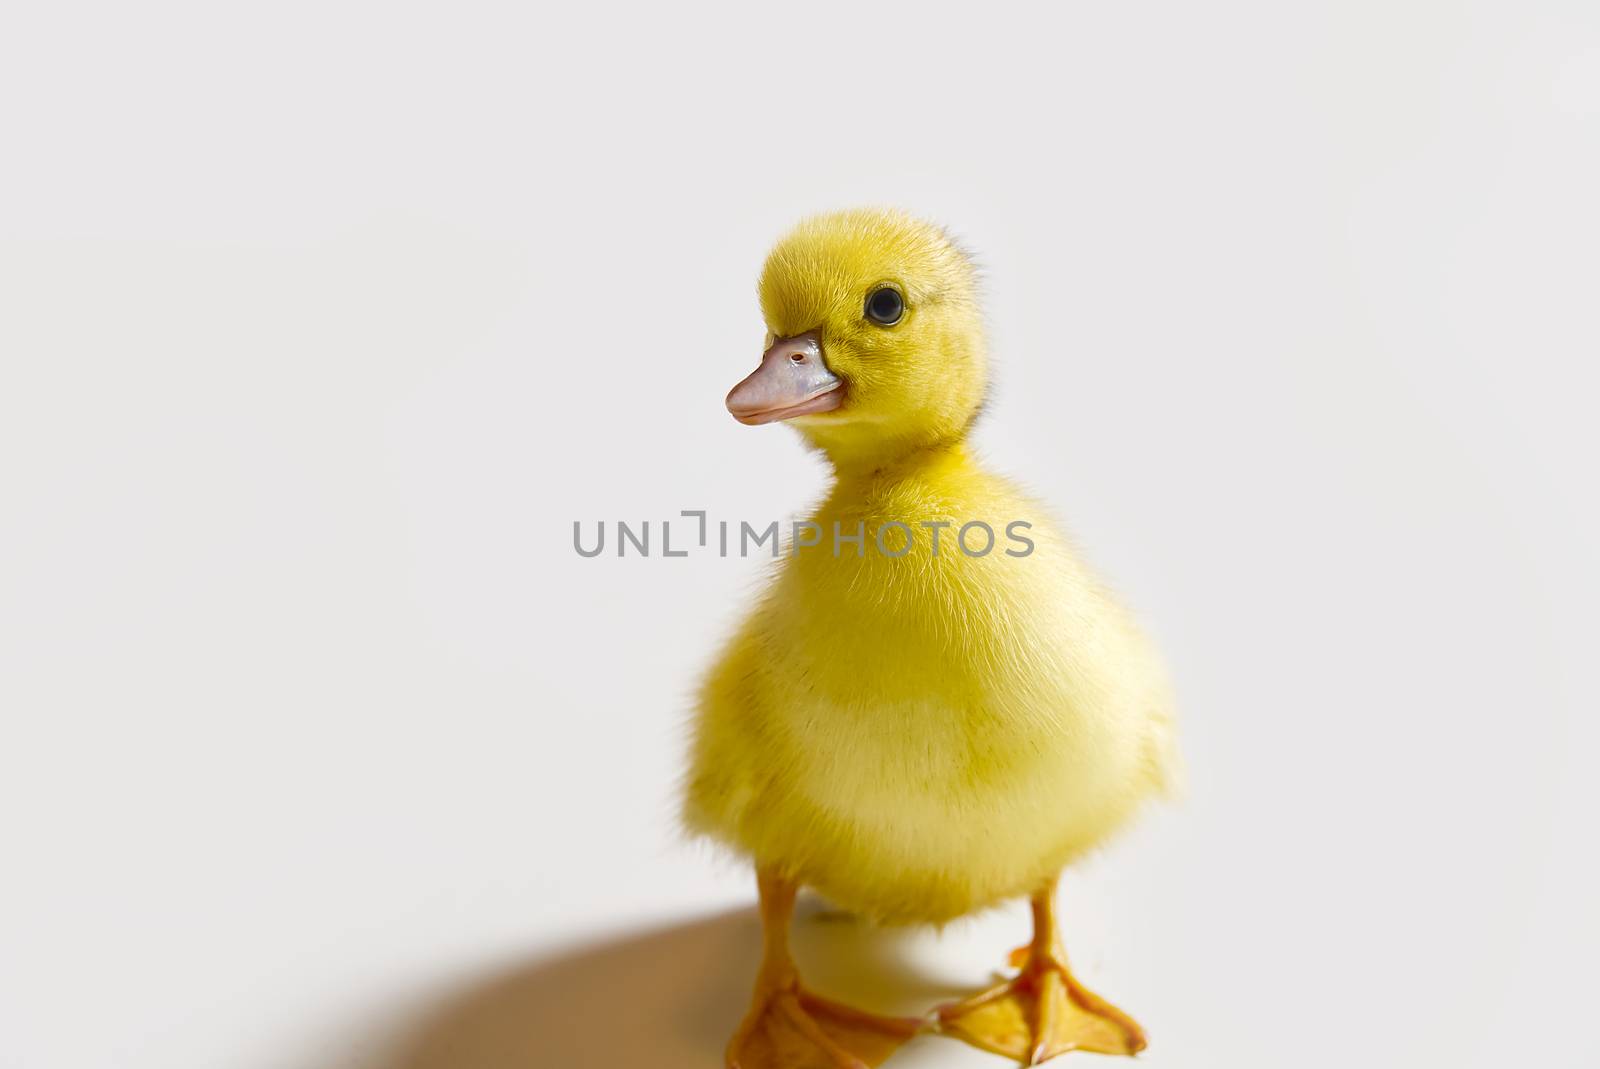 Few days old yellow duckling isolated close-up. by PhotoTime